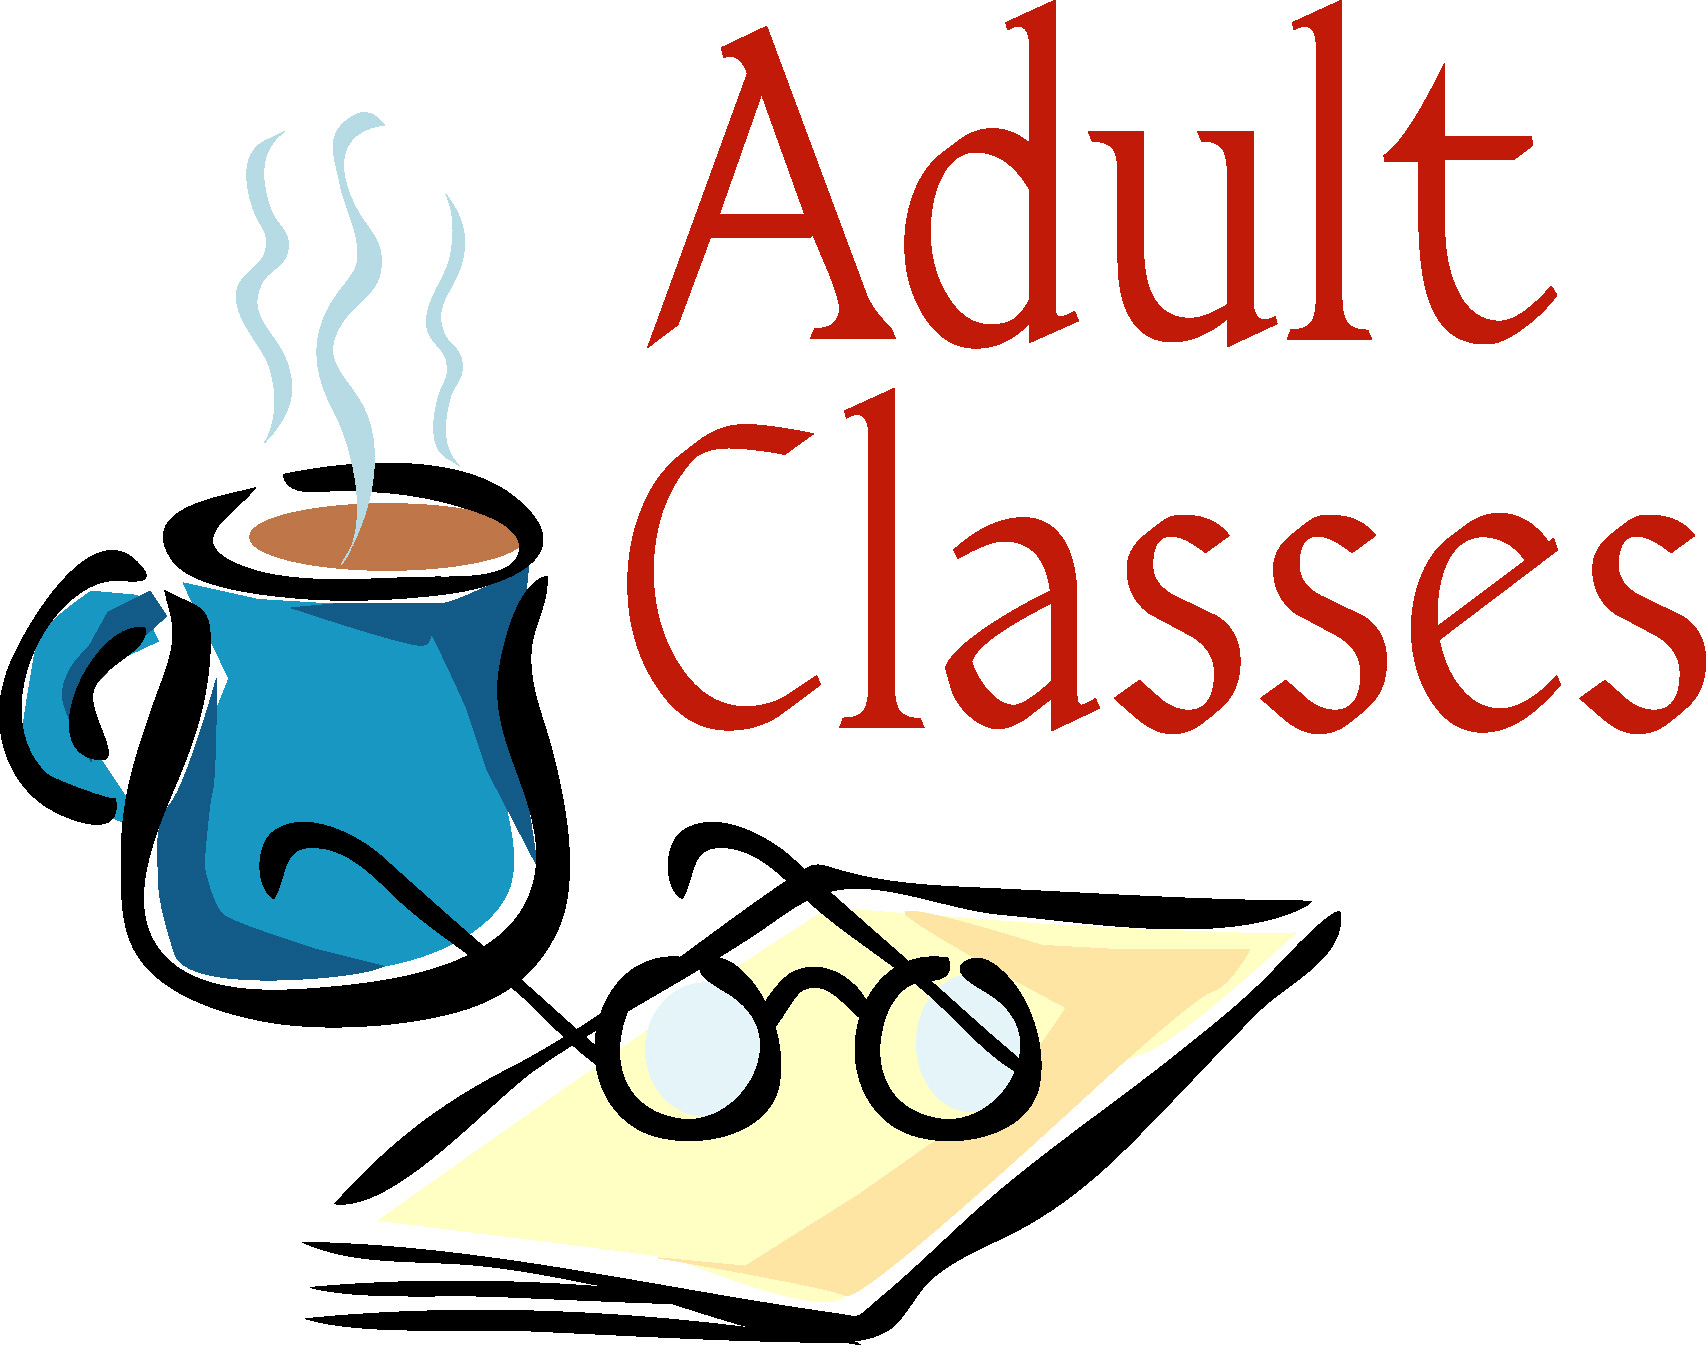 Council For Adult Education 83